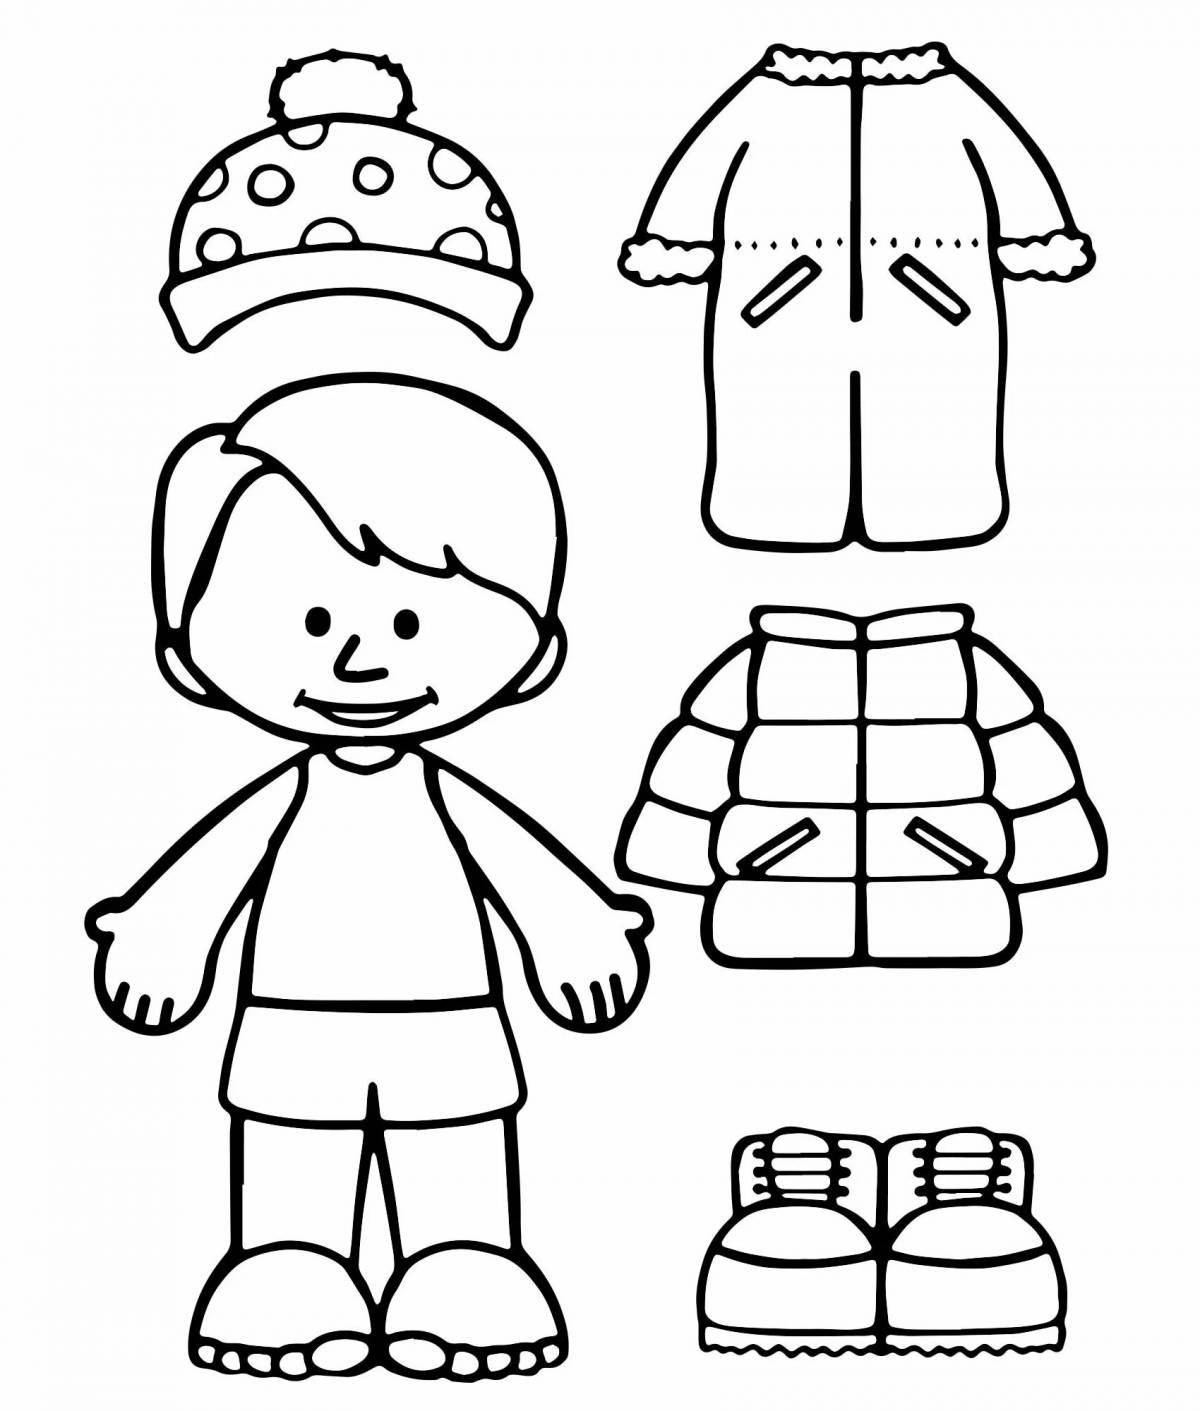 Live coloring of winter clothes for children 6-7 years old